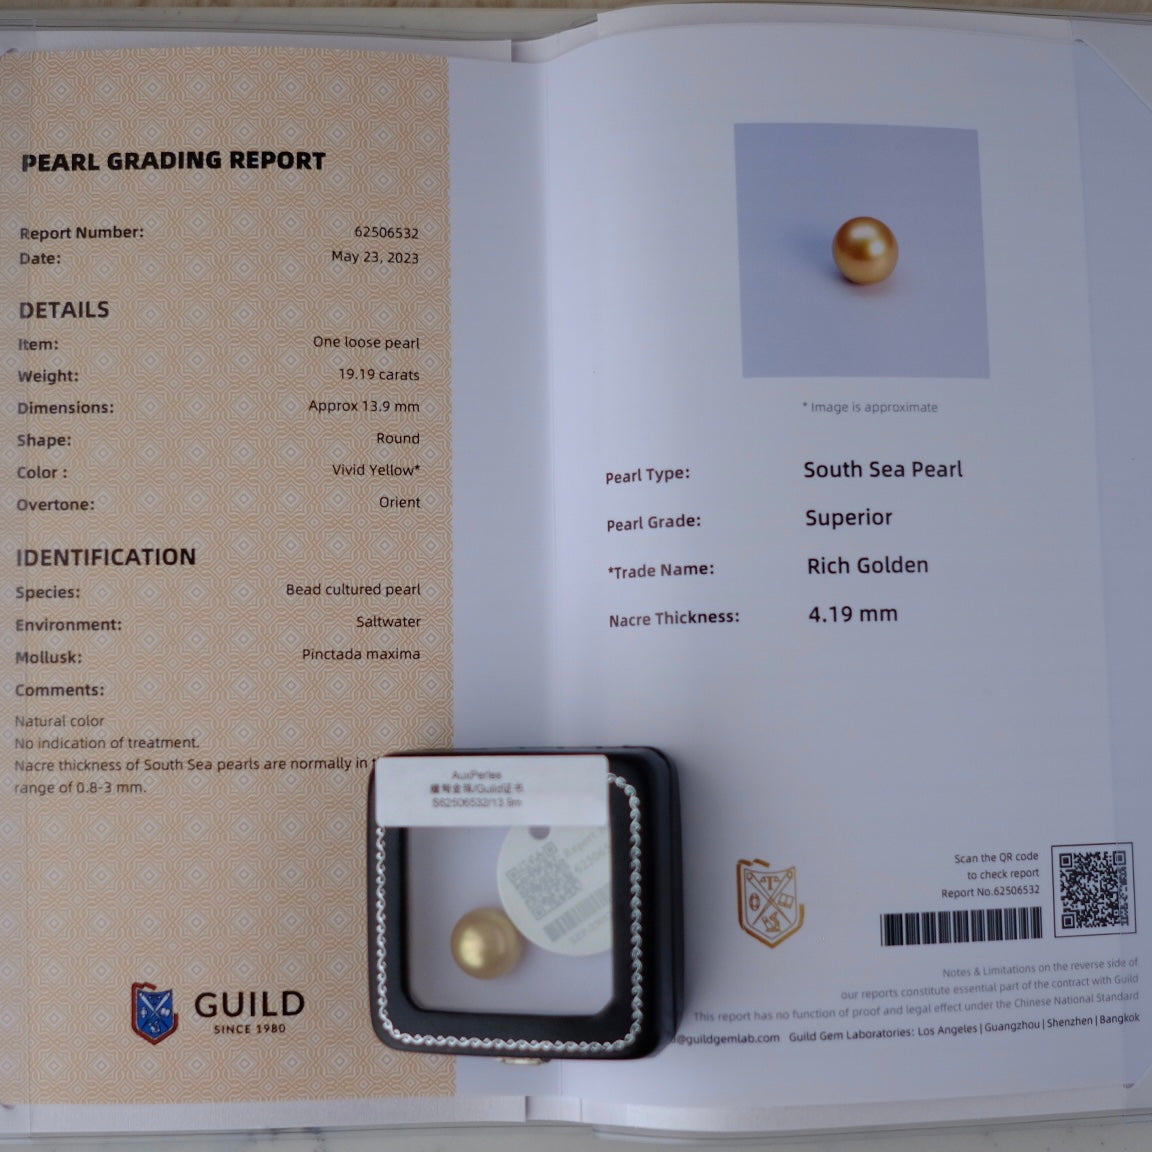 Golden South Sea Pearl, 13.9mm, Loose Pearl, GUILD Certificate